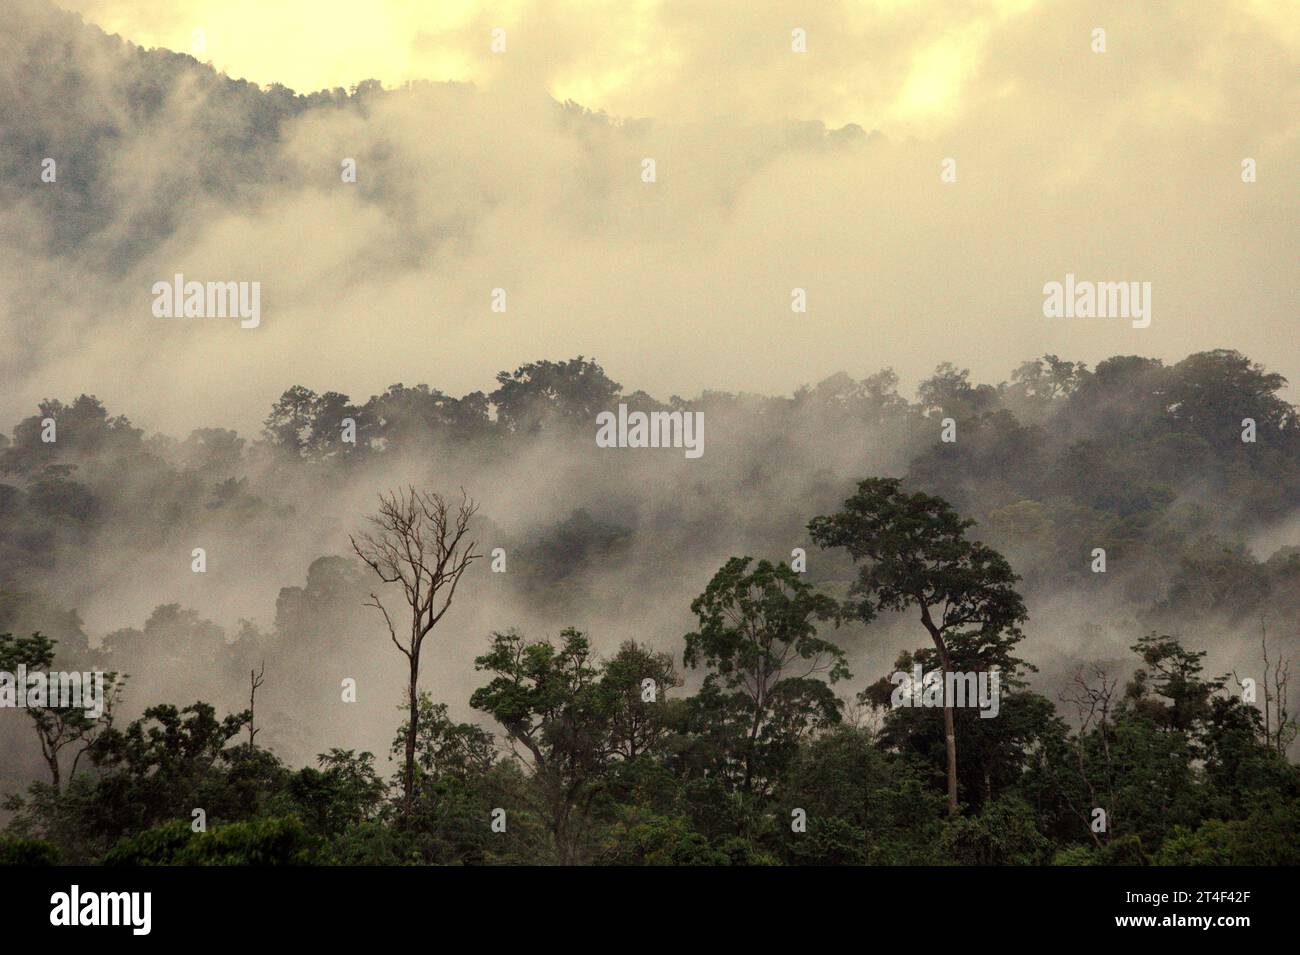 Landscape of rainforest at the foot of Mount Tangkoko and Duasudara (Dua Saudara) in North Sulawesi, Indonesia. According to a new report by Wildlife Conservation Society, high-integrity tropical forests are estimated to remove and store around 3.6 billion tons of CO2 per year (net) from the atmosphere. However, the forest—and wildlife species that support it—are threatened. 'Between 2012 and 2020, temperatures increased by up to 0.2 degree Celsius per year in the forest, and the overall fruit abundance decreased by 1 percent per year,” wrote a team of scientists led by Marine Joly. Stock Photo